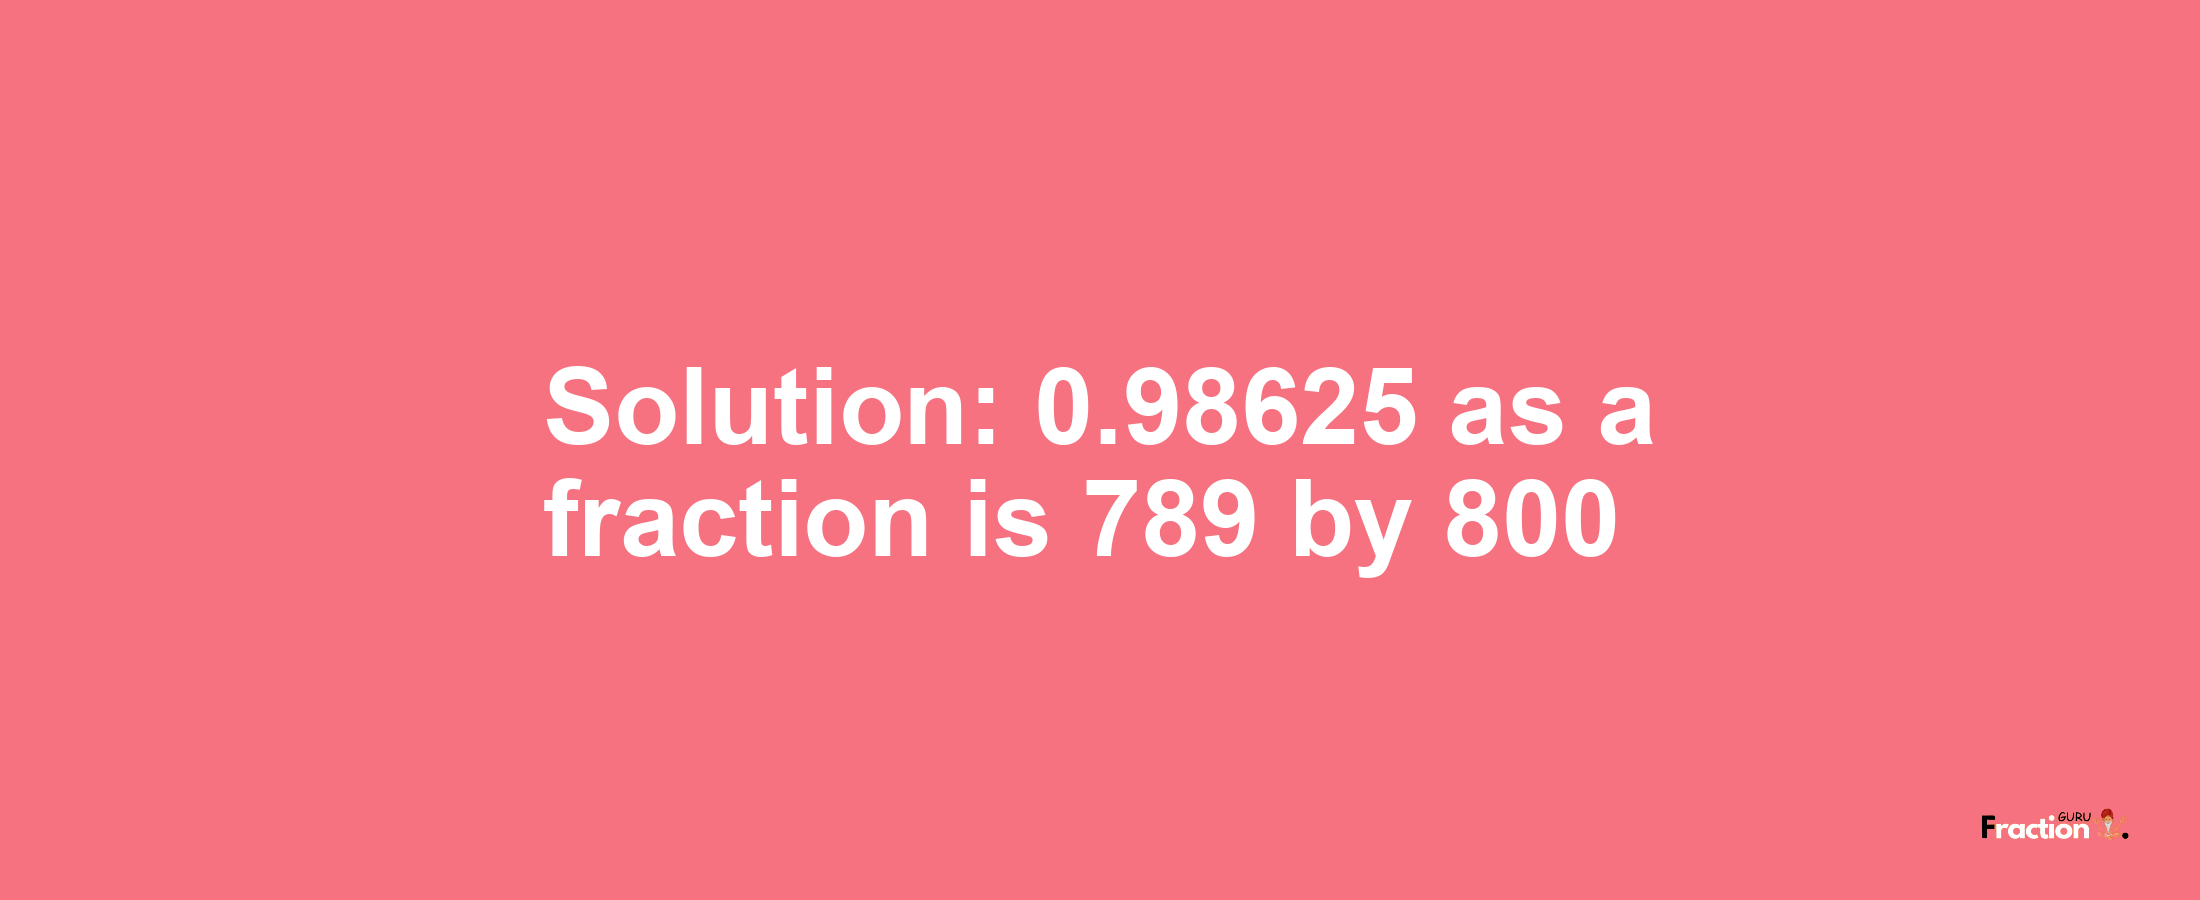 Solution:0.98625 as a fraction is 789/800